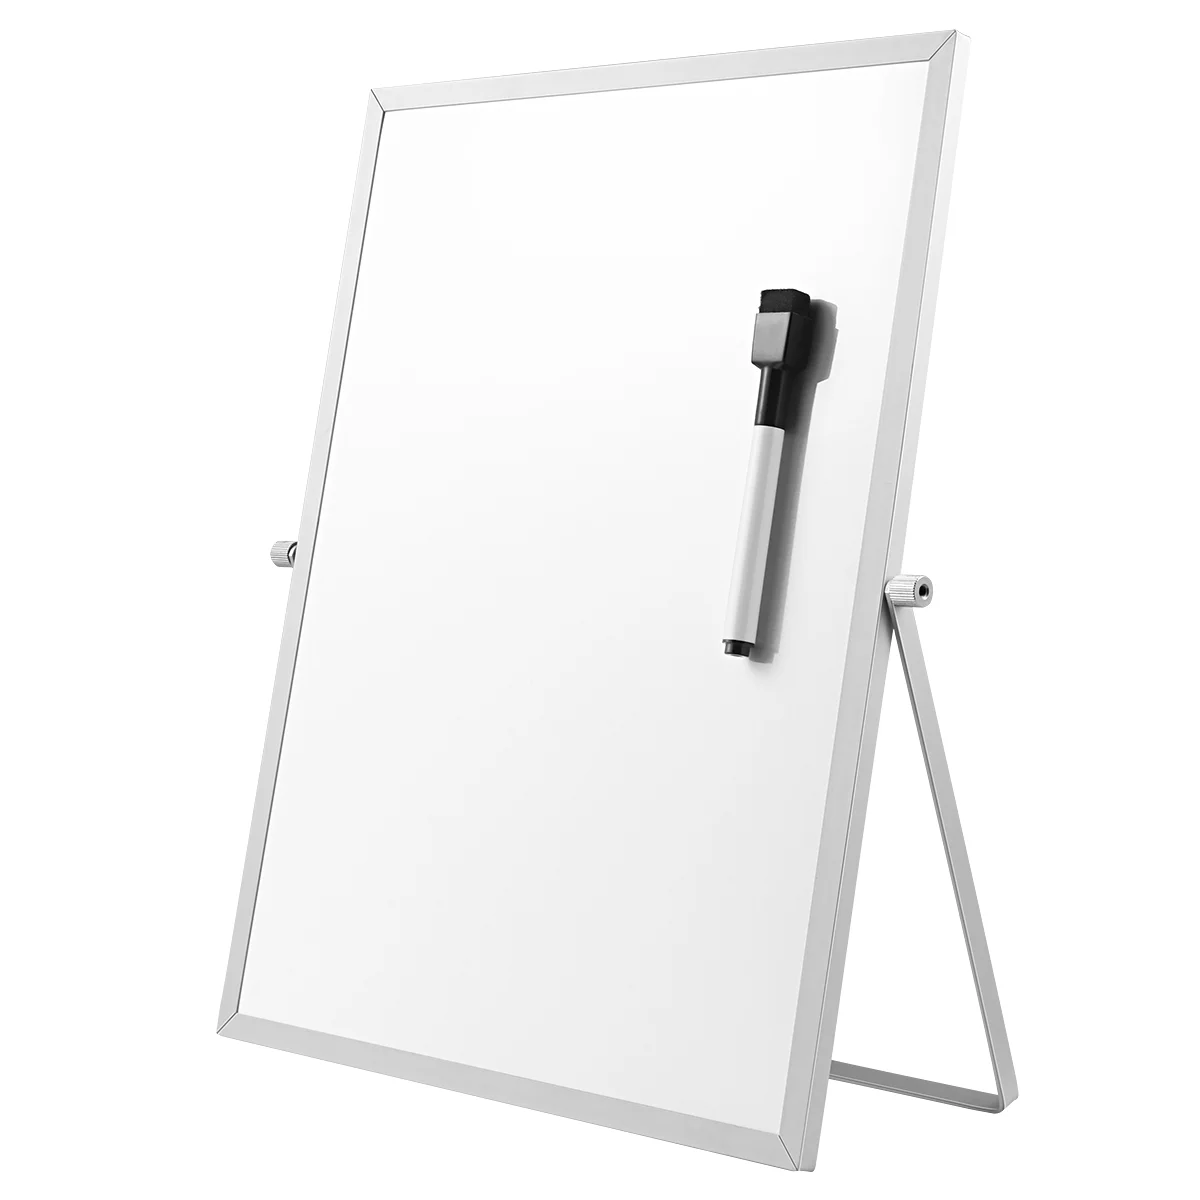 double sided dry erase board outdoor indoor whiteboard student white board writing board Magnetic White Board Dry Erase Board Double Sided Practical with Stand White Board for Office School Home Whiteboard Erasable